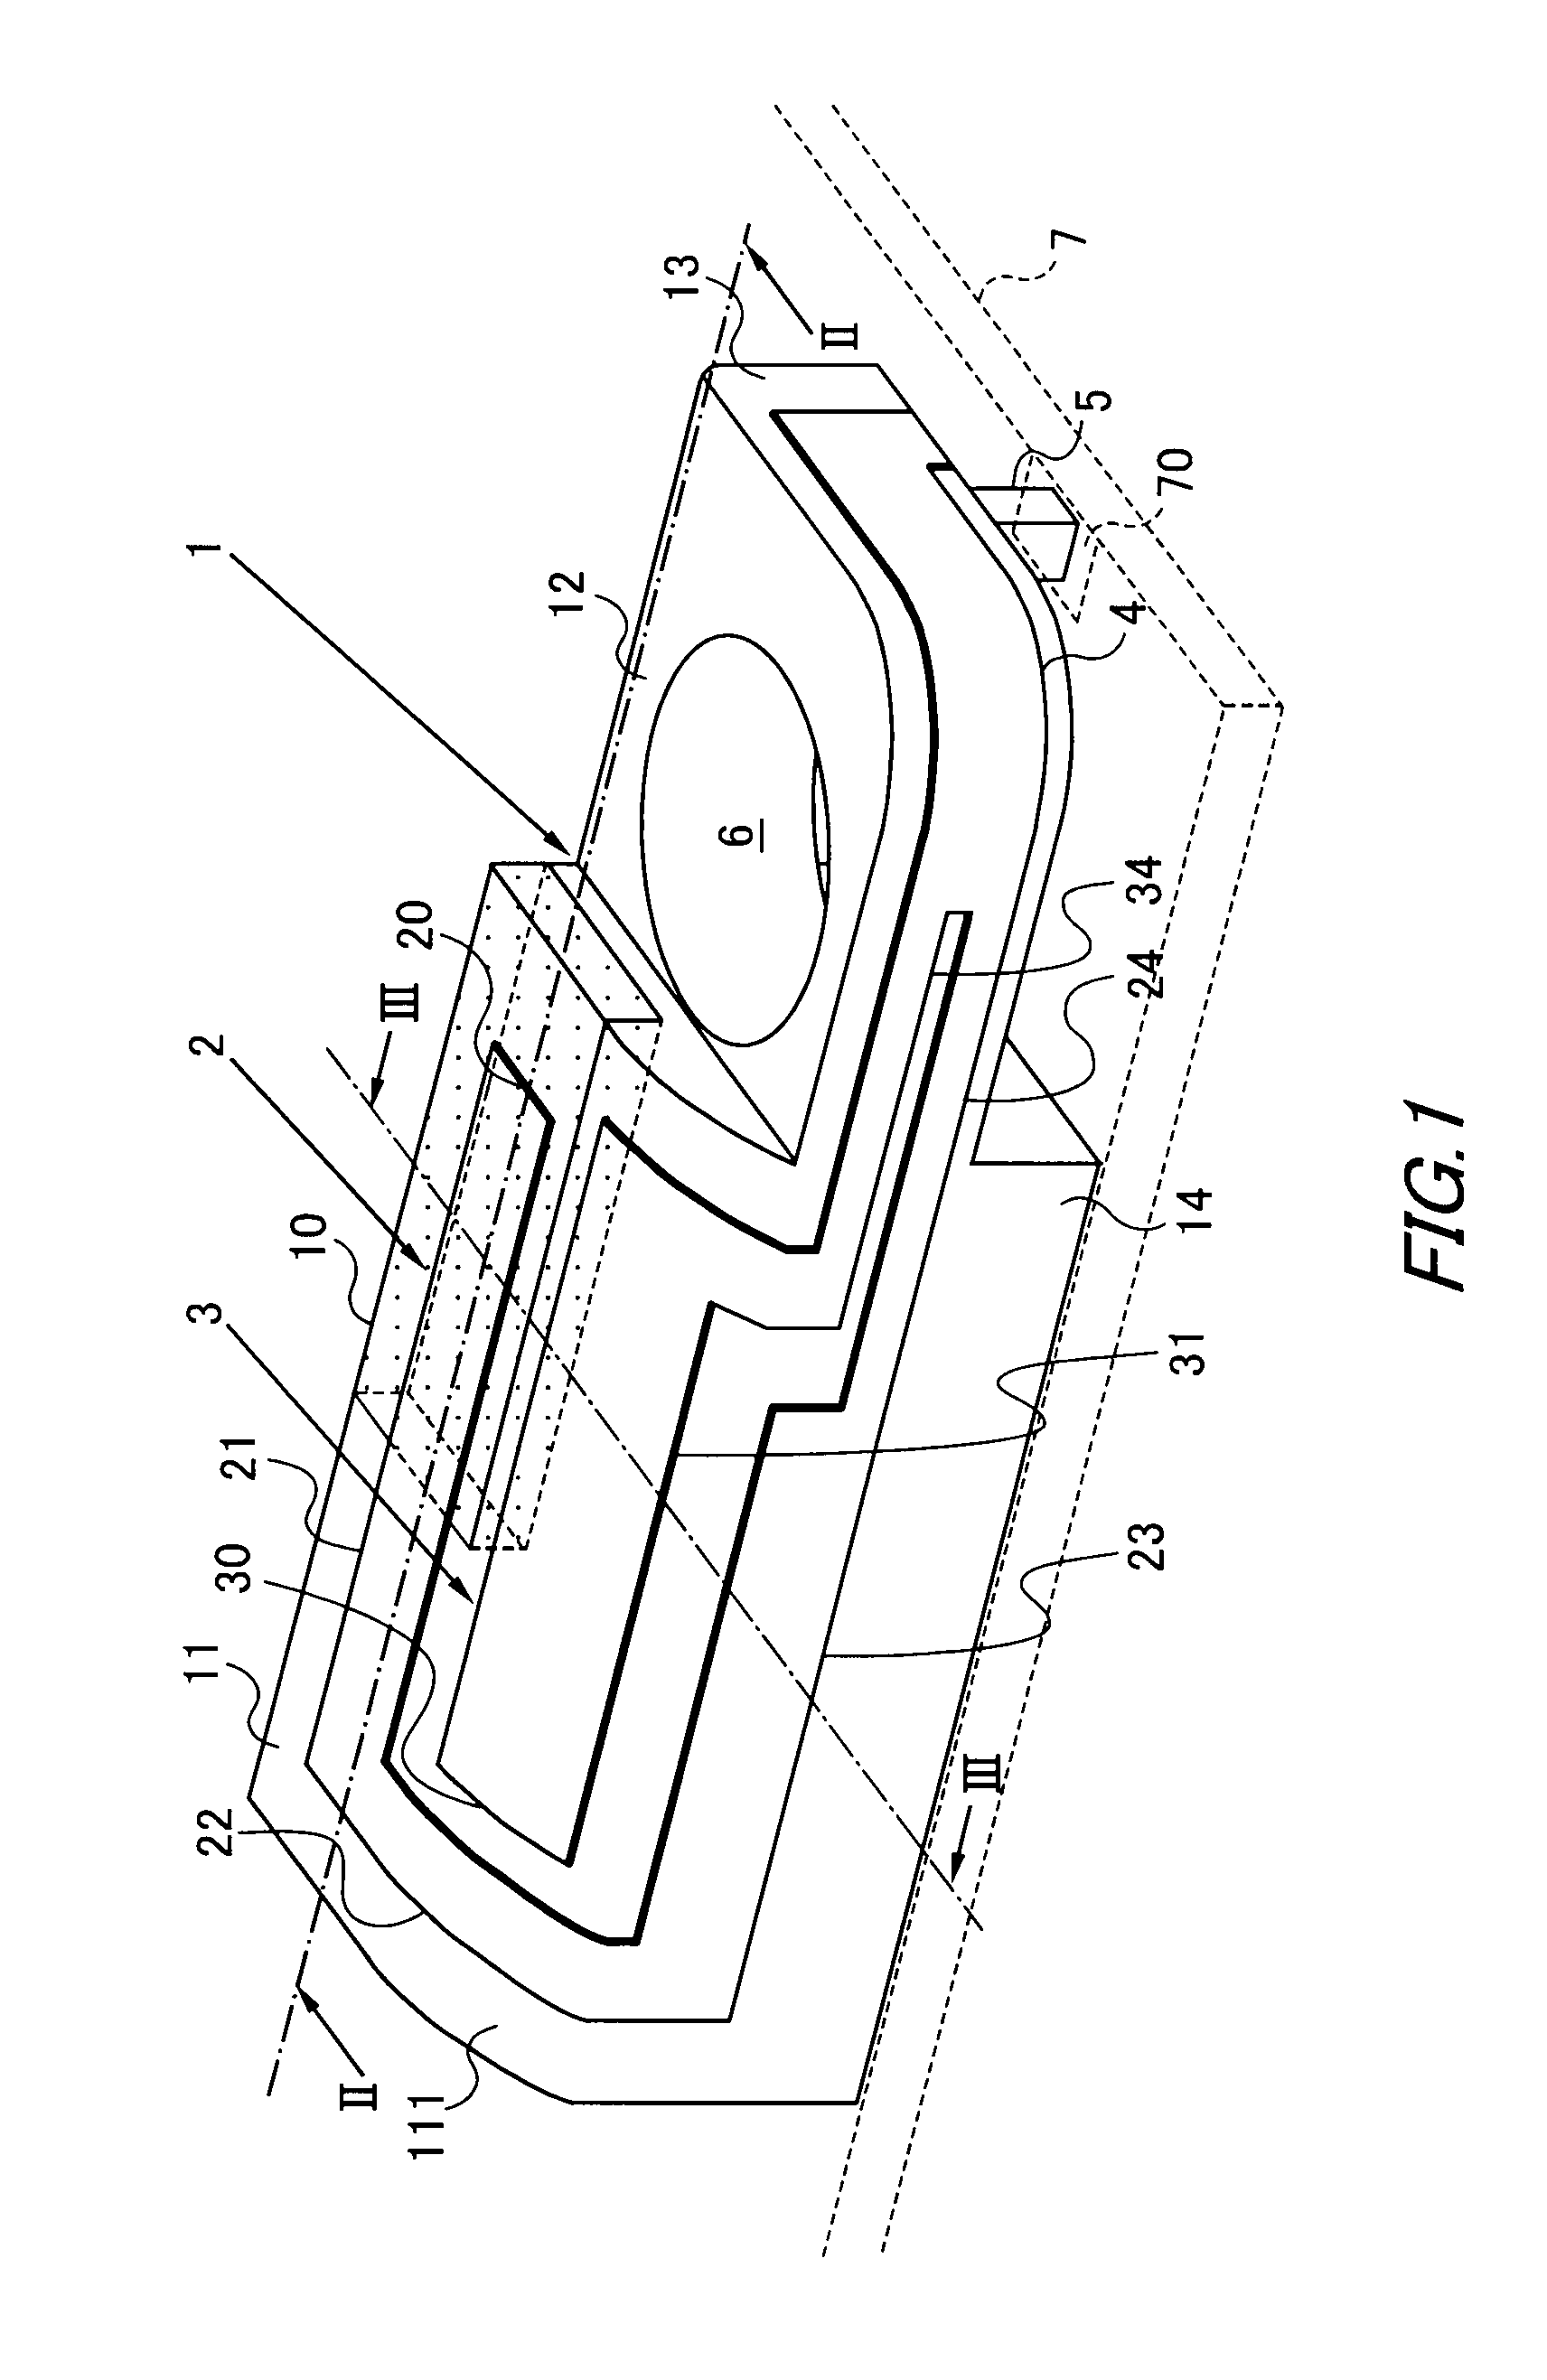 Multiple resonance antenna, manufacturing method therefor and communication device